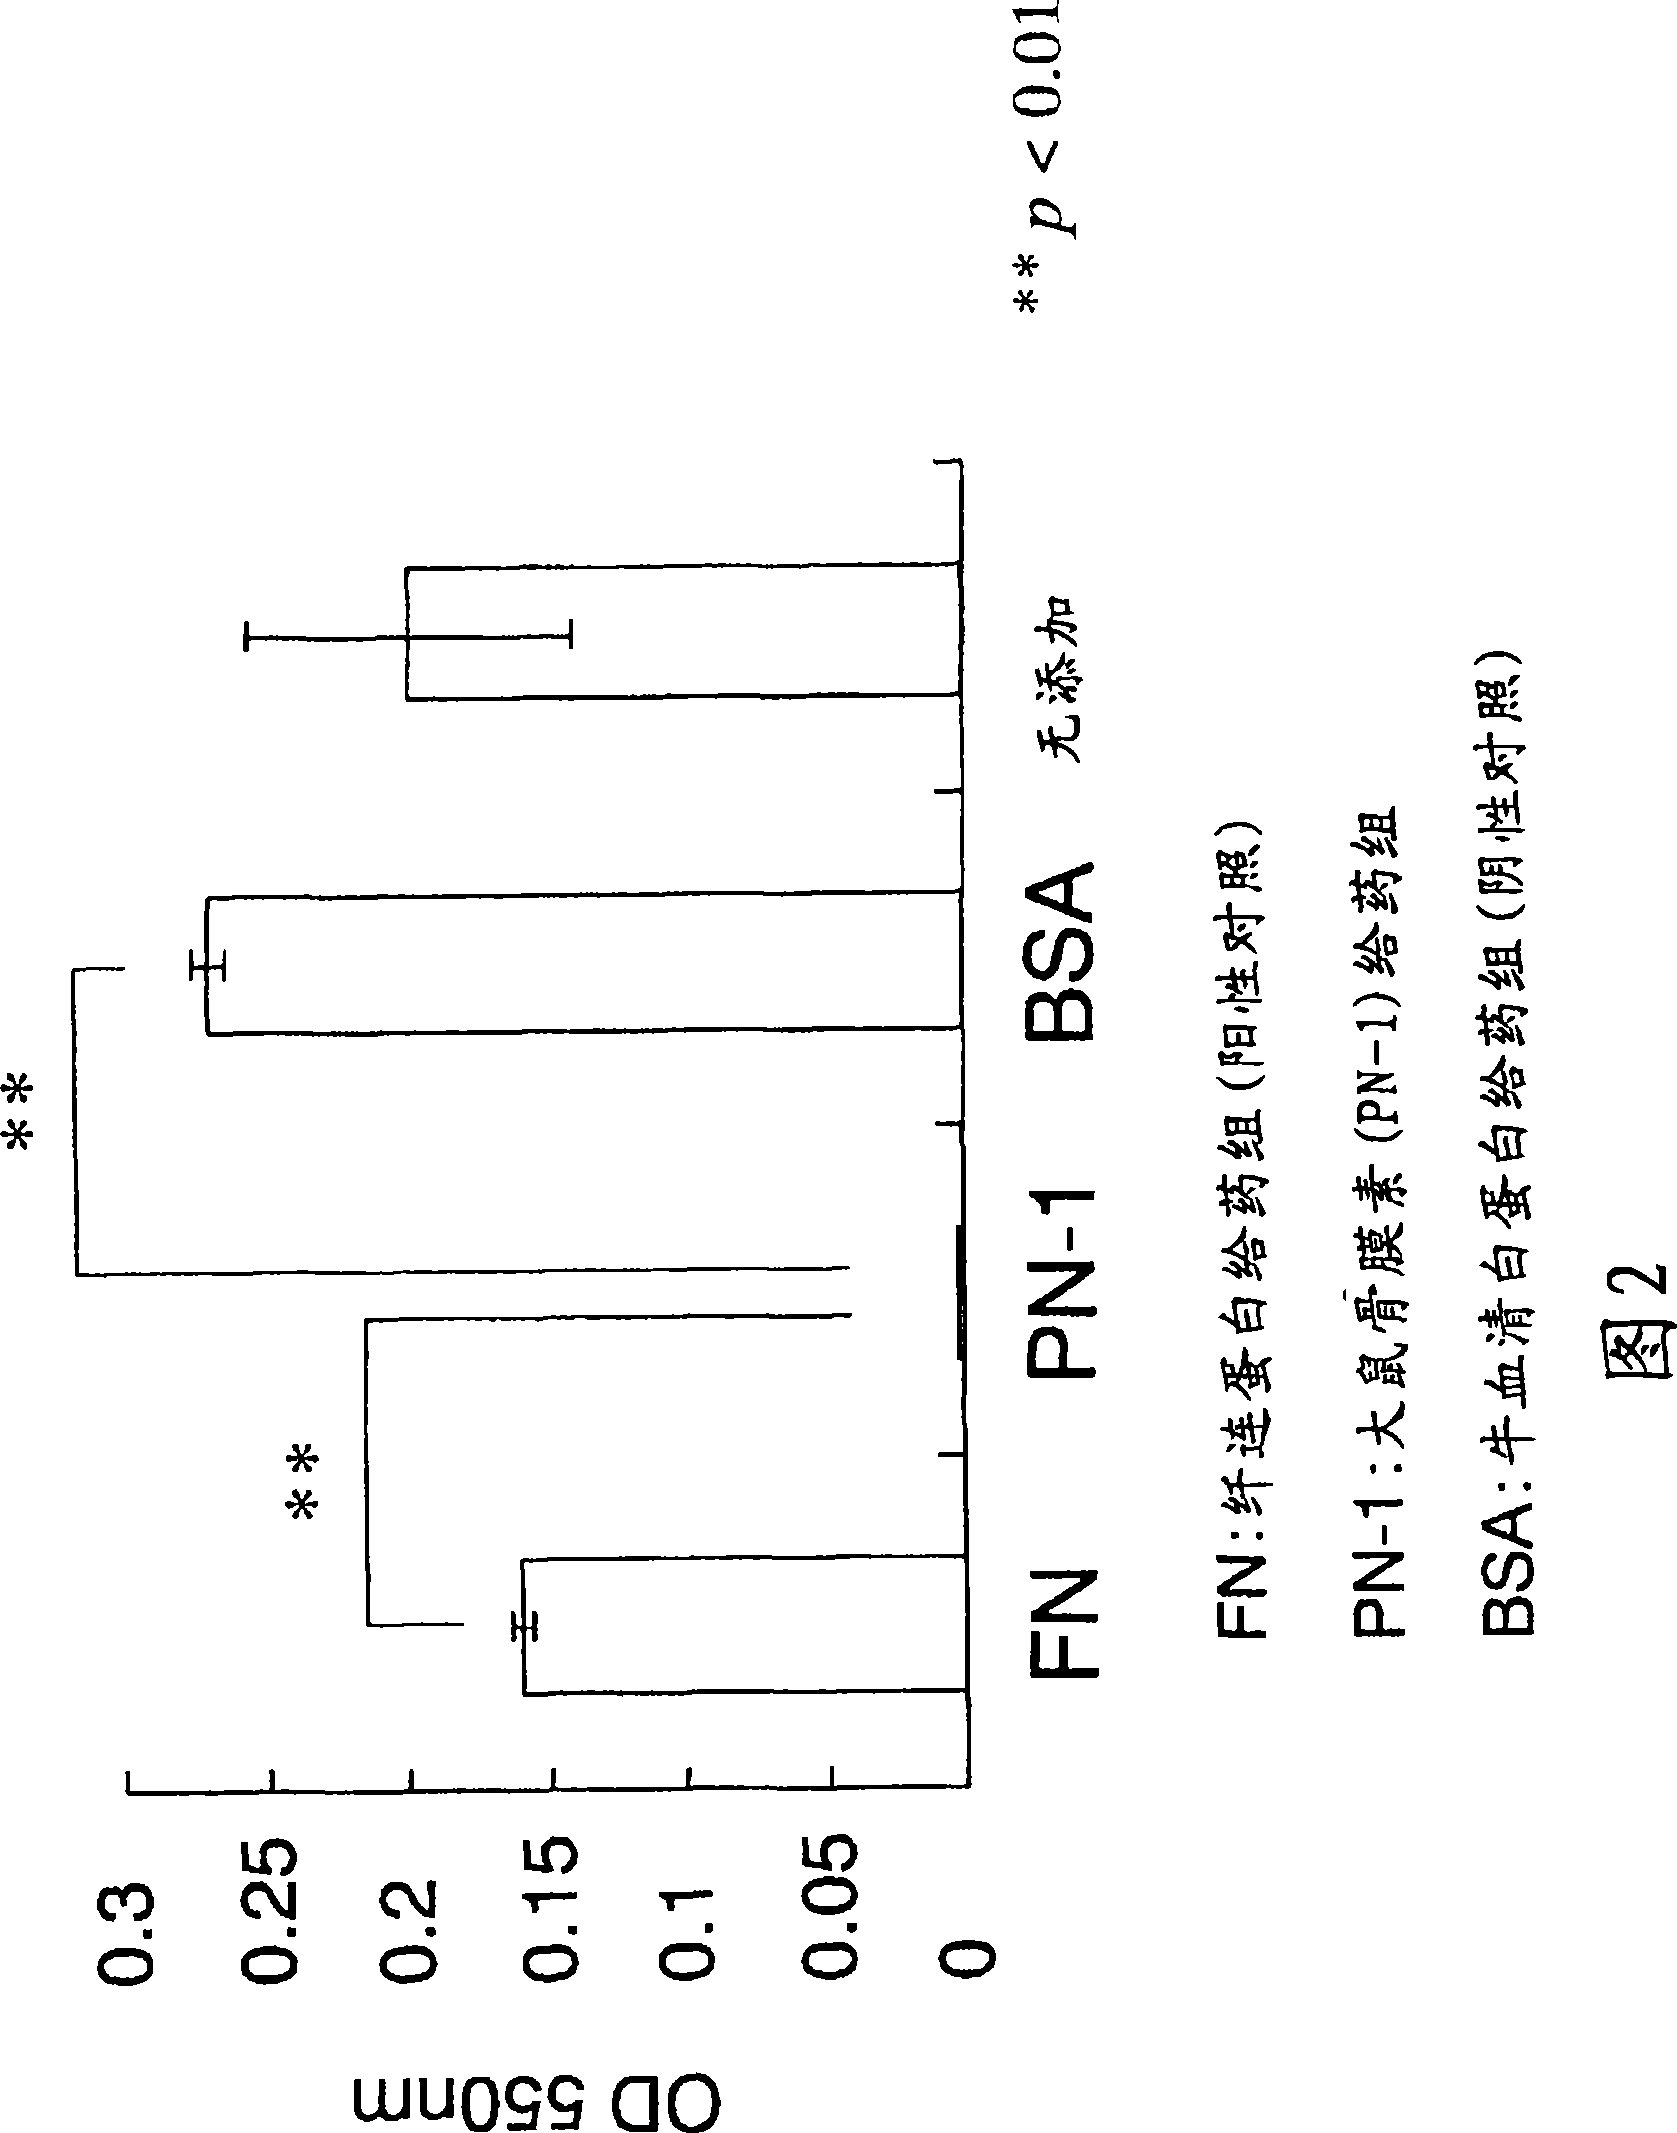 Anti-periostin antibody and pharmaceutical composition for preventing or treating periostin-related disease containing the same